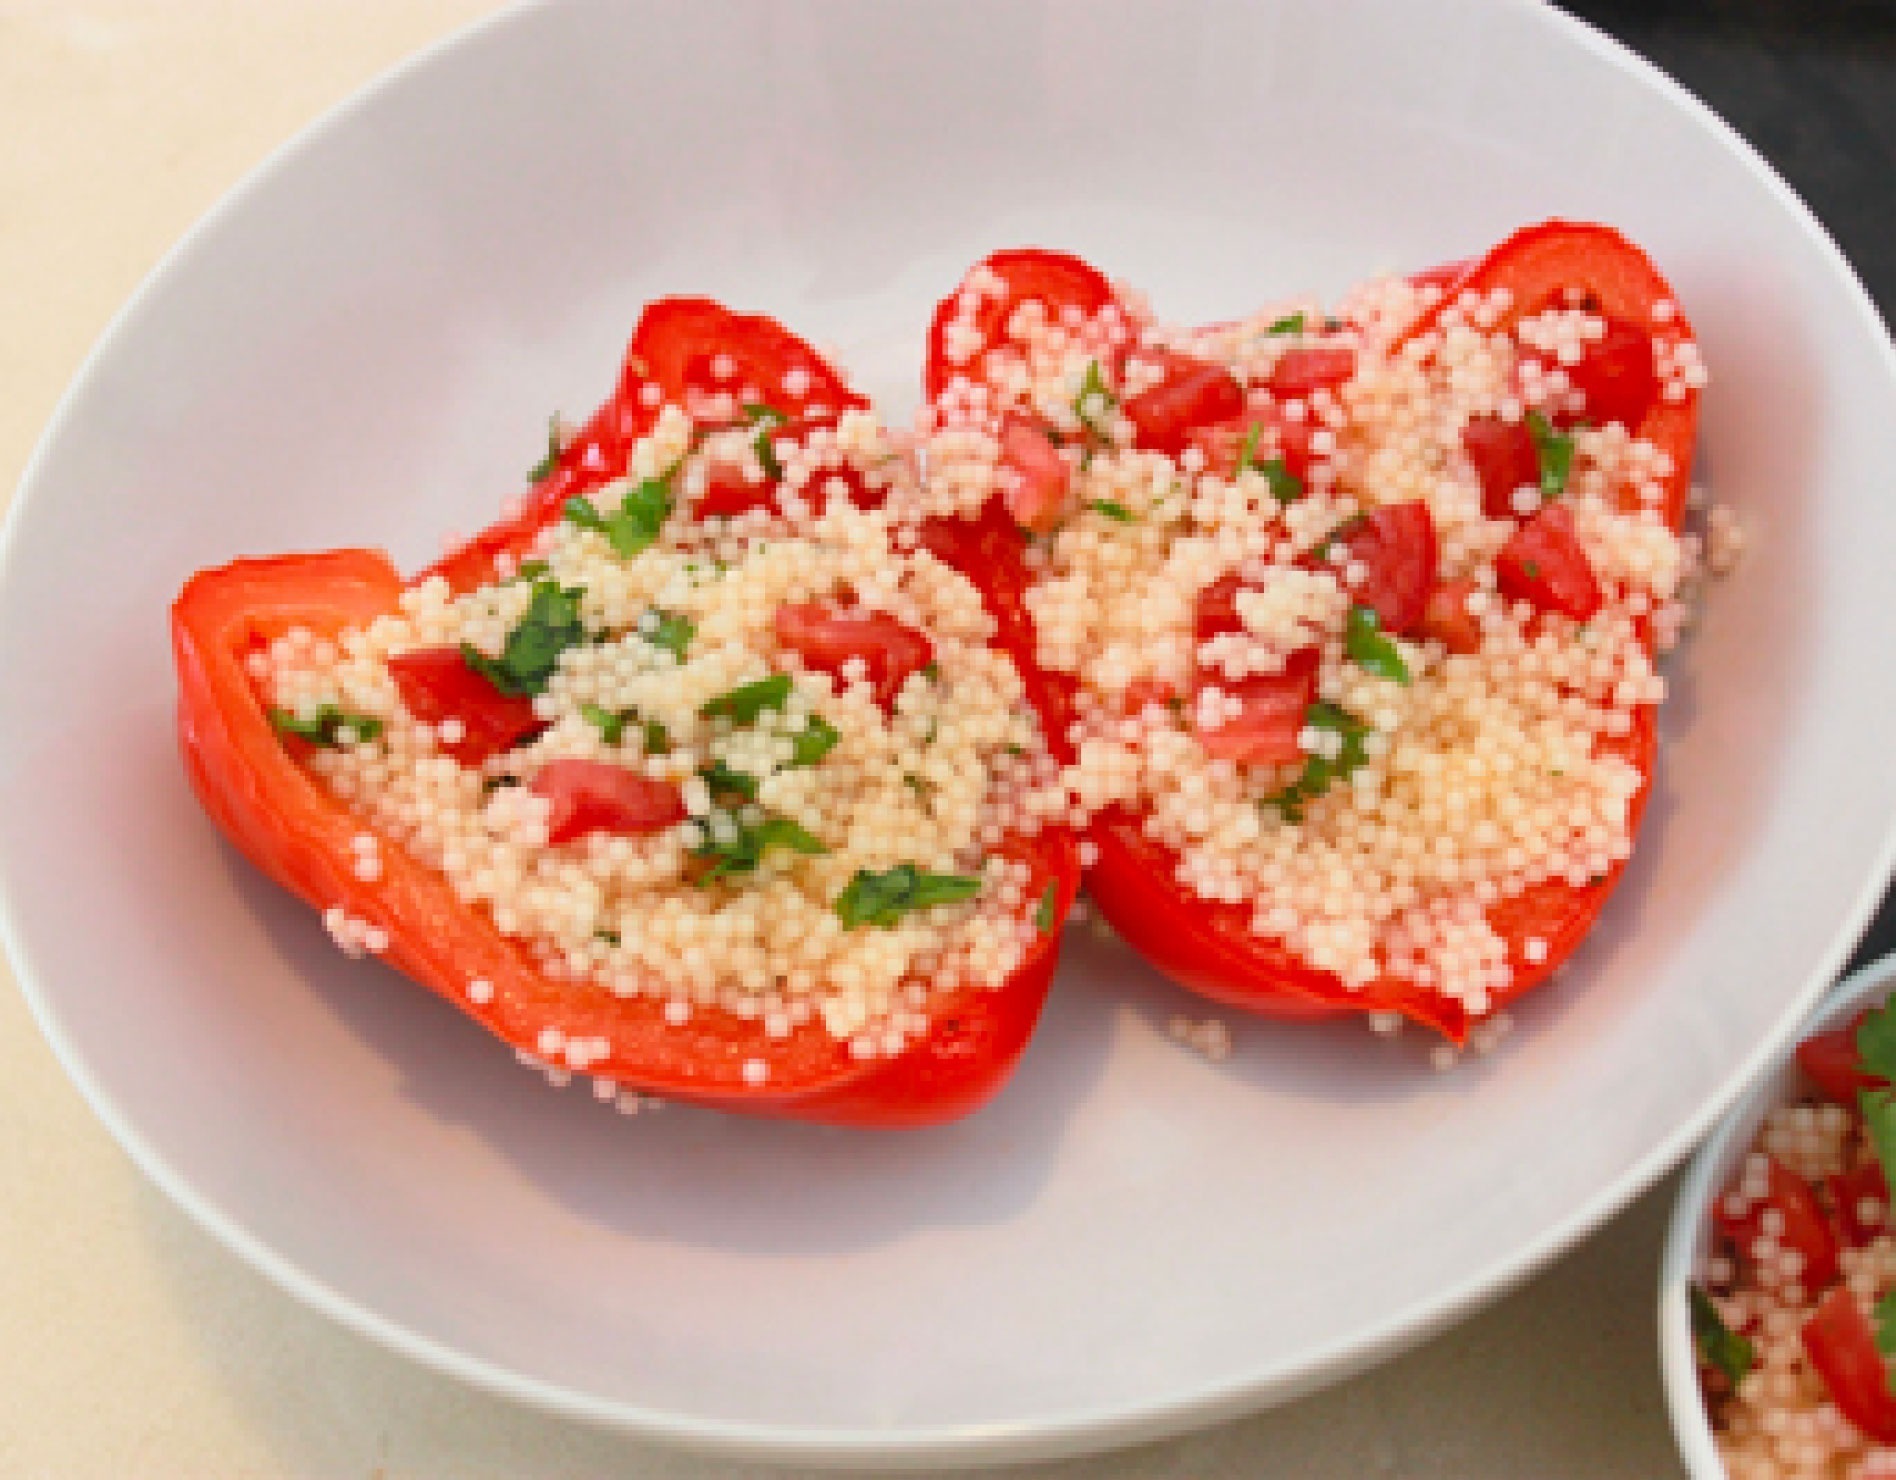 RED PEPPERS & COUS COUS